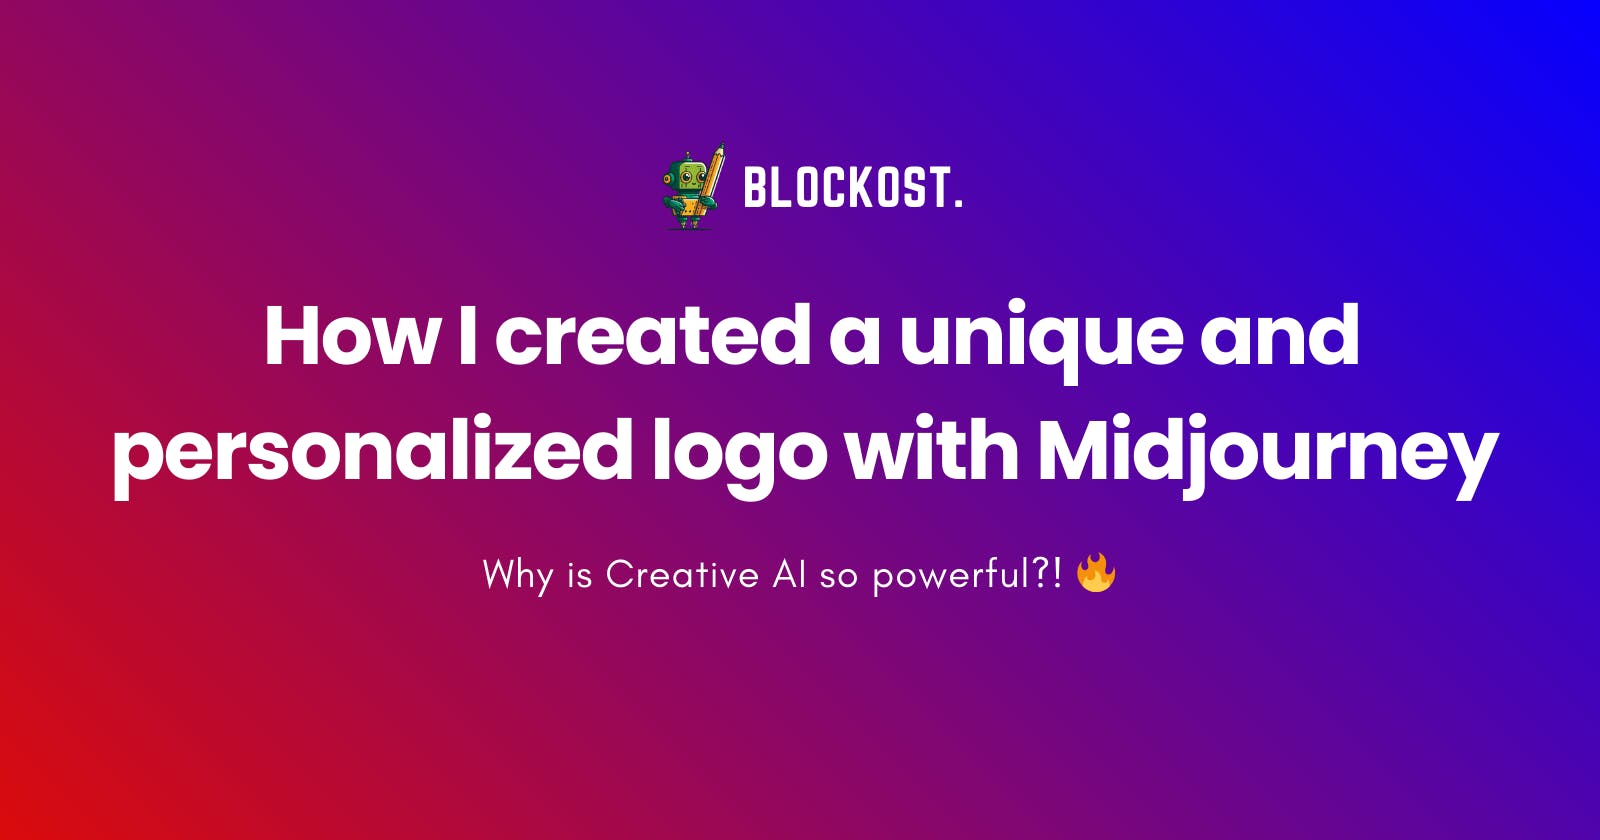 How I created a unique and personalized logo with Midjourney